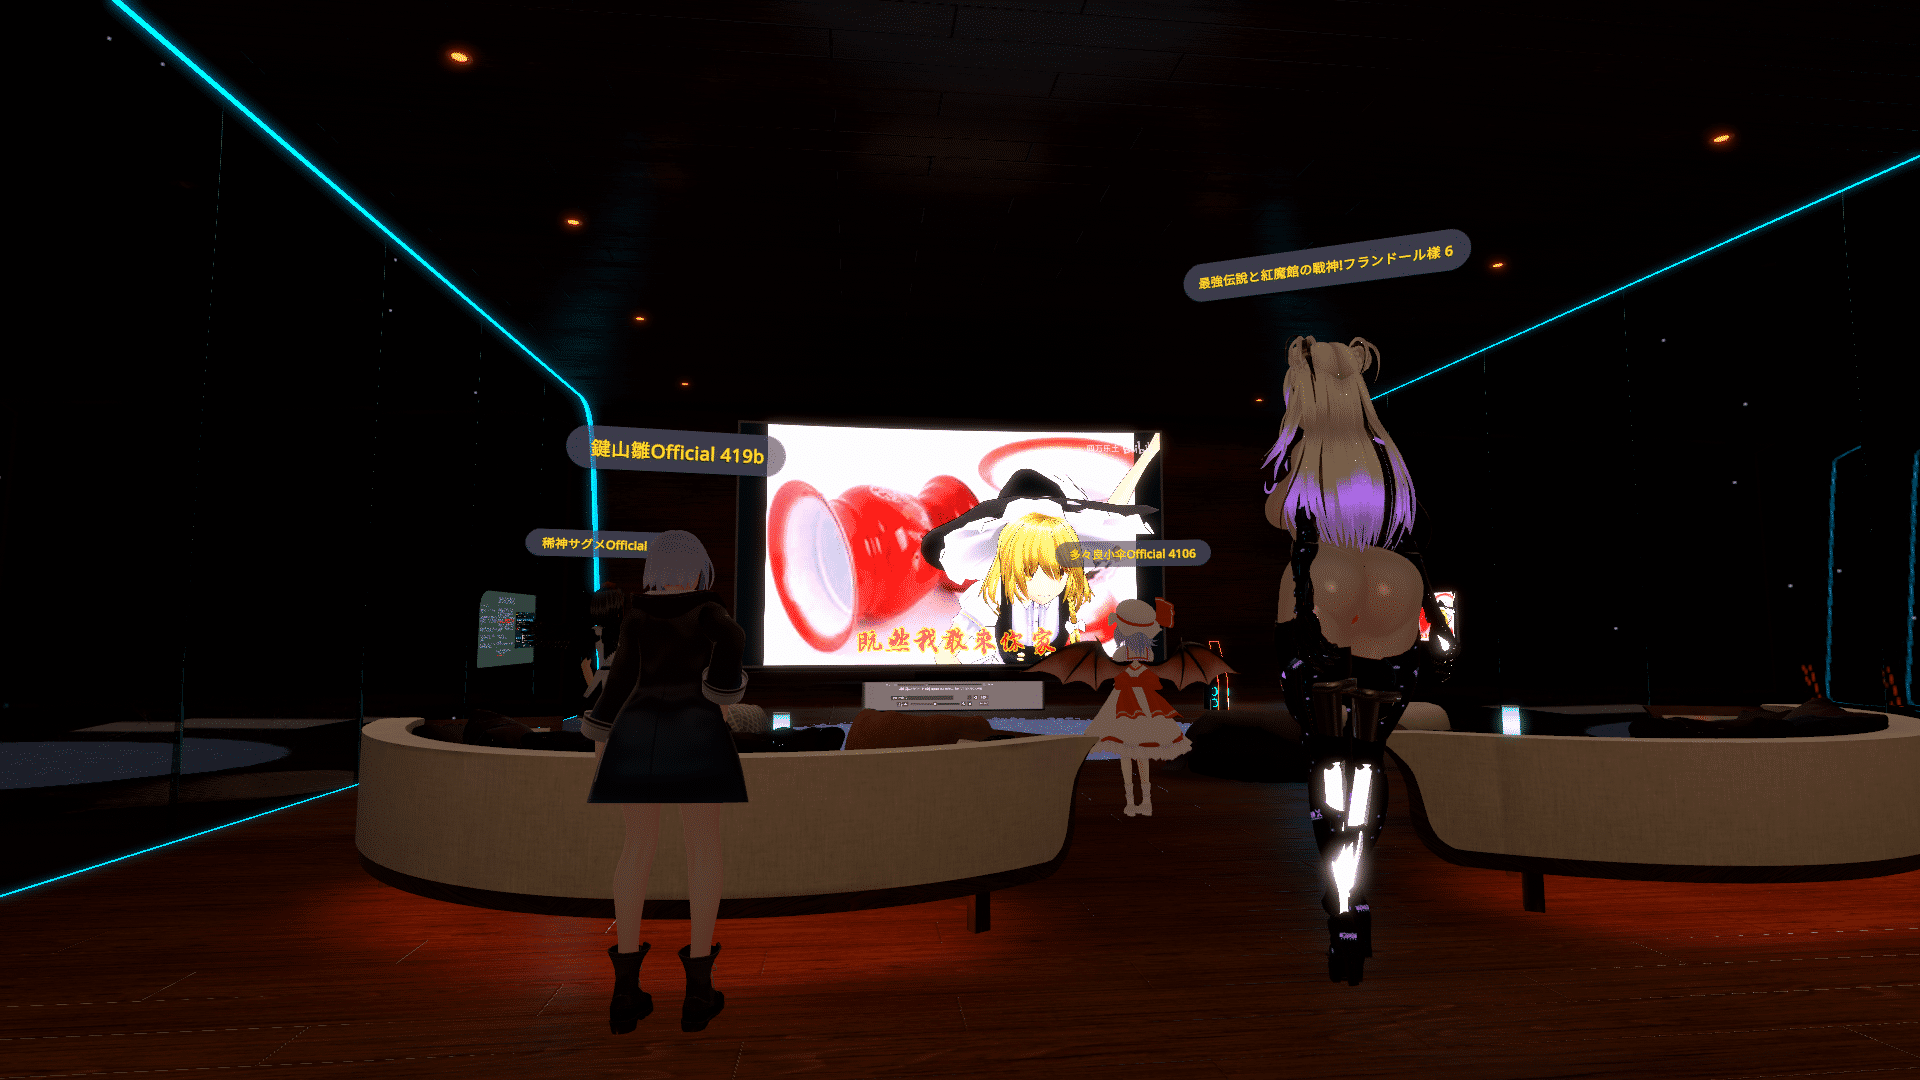 VRChat_1920x1080_2022-05-01_00-44-02_607.png